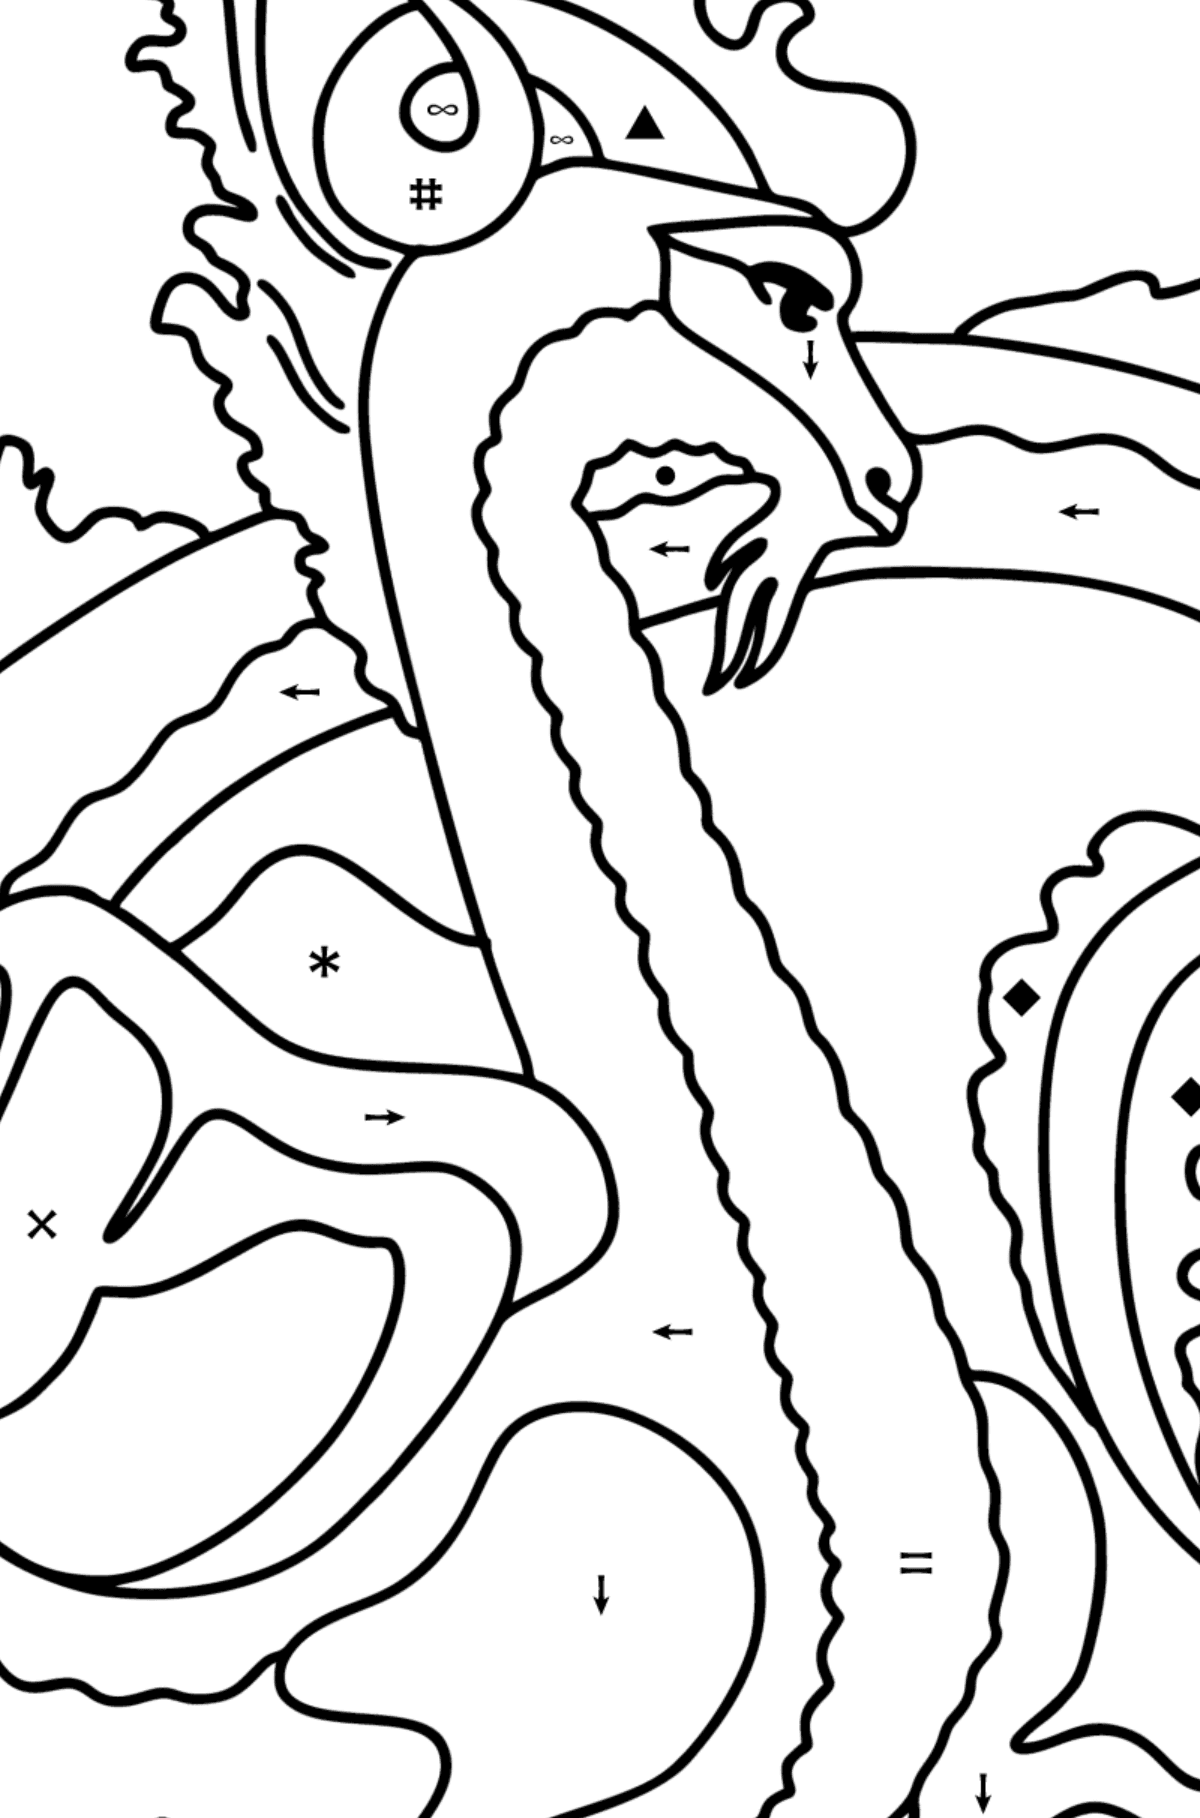 Mythical Dragon coloring page - Coloring by Symbols for Kids